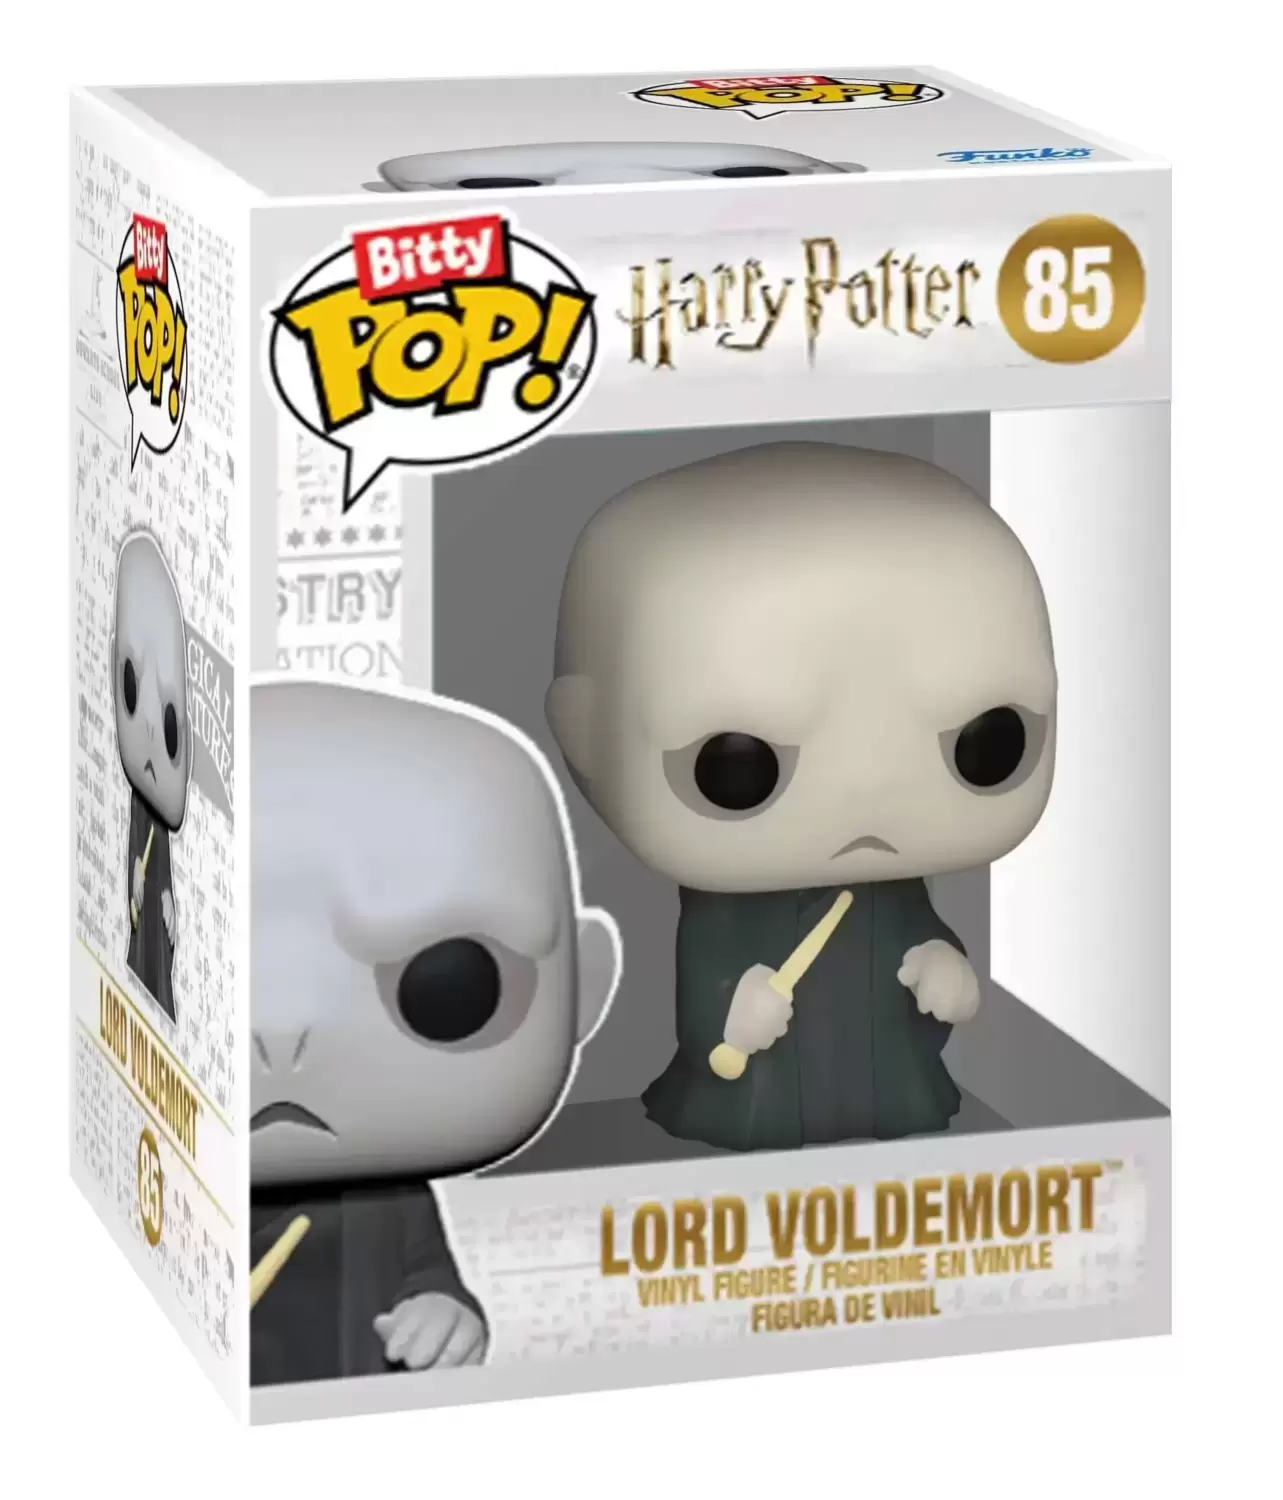 Bitty POP! - Harry Potter - Lord Voldemort